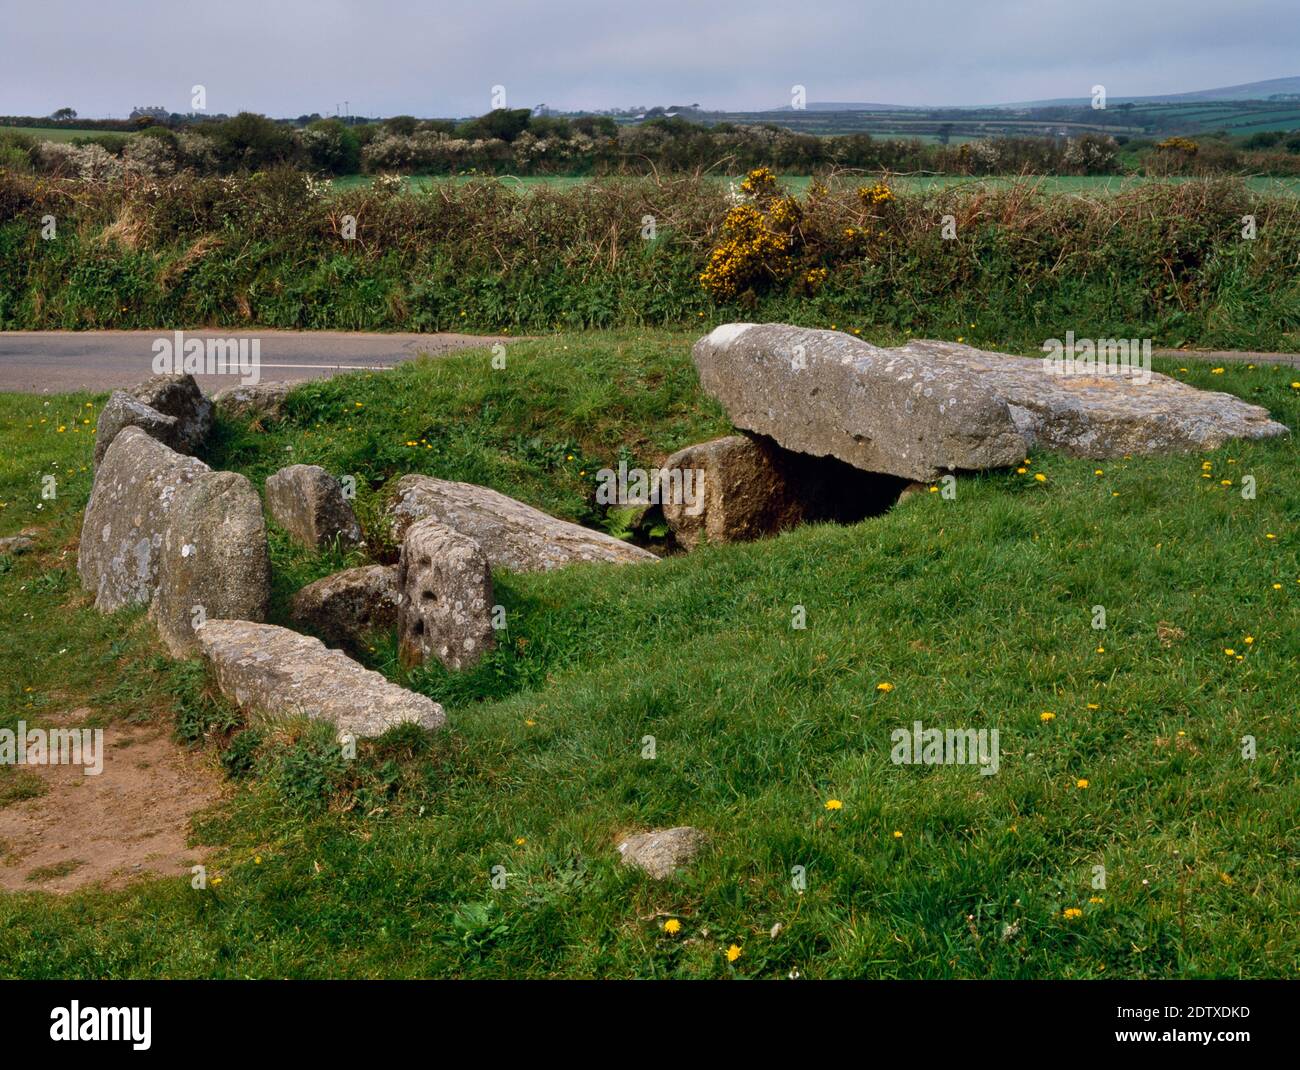 View NW of Tregiffian Burial Chamber, Cornwall, England, UK, showing the kerbed round barrow, cup-marked stone, entrance passage & central chamber. Stock Photo